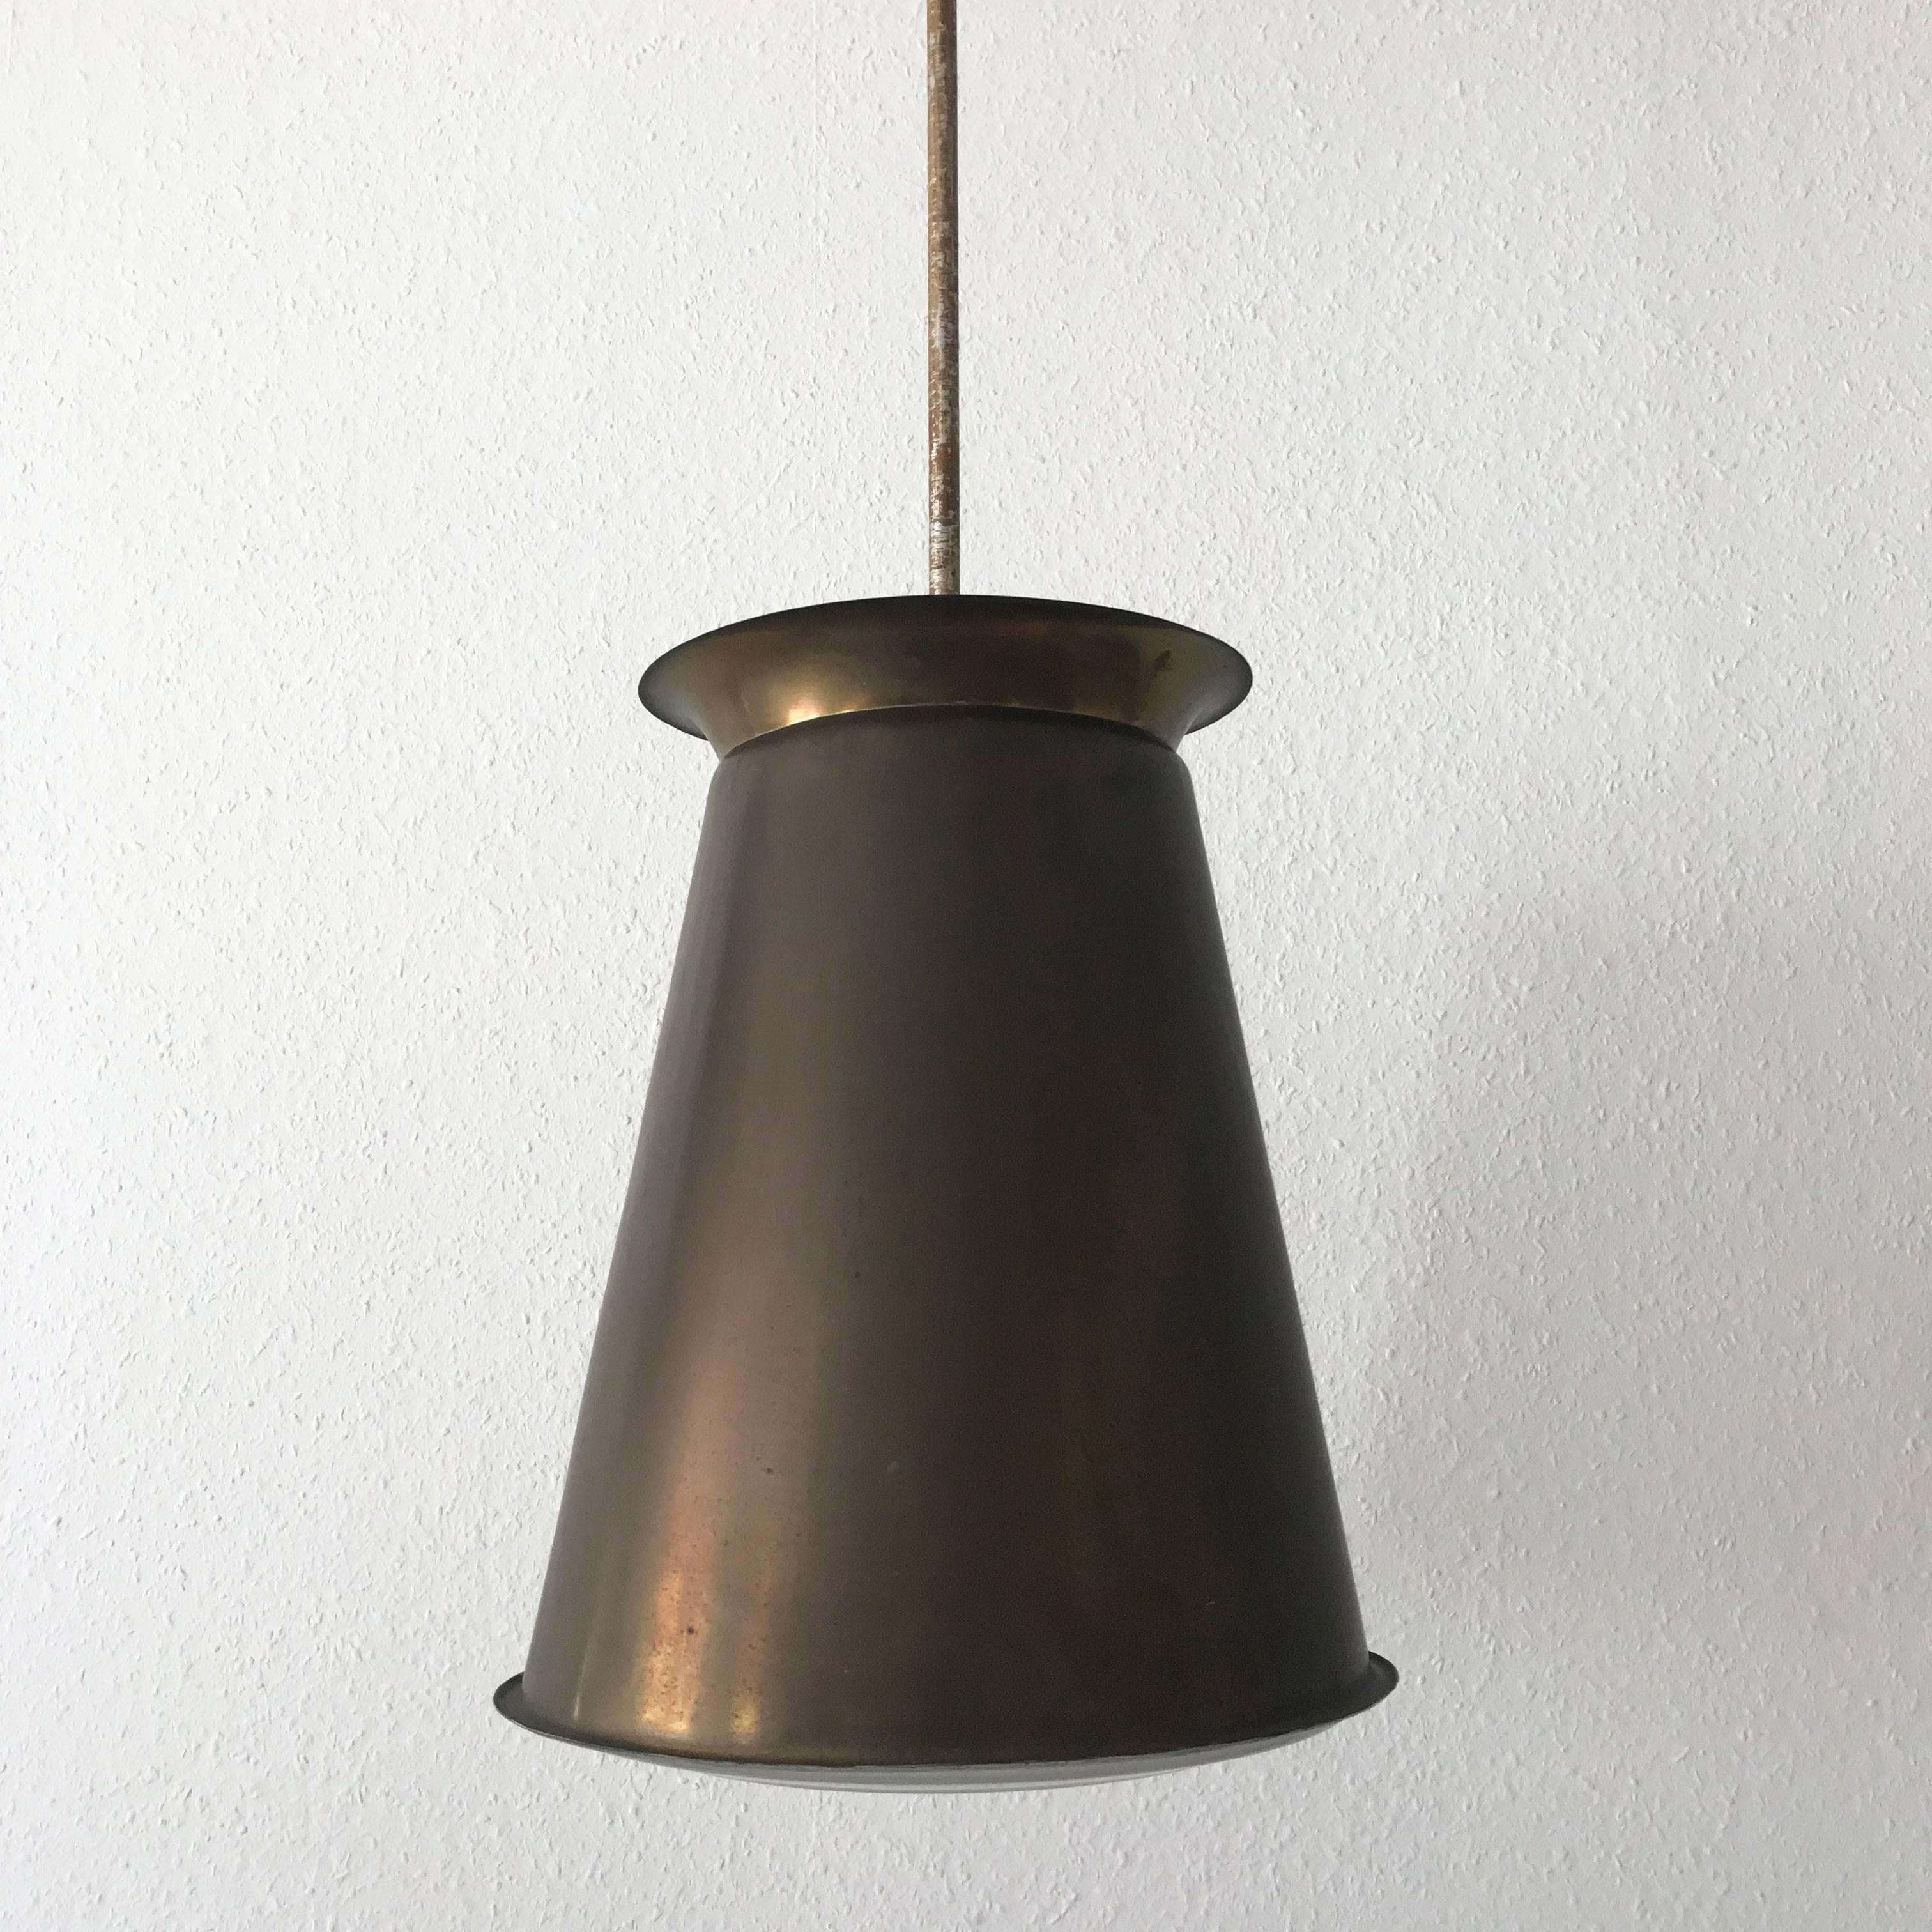 Exceptional Bauhaus Pendant Lamp by Adolf Meyer for Zeiss Ikon, 1930s, Germany For Sale 1